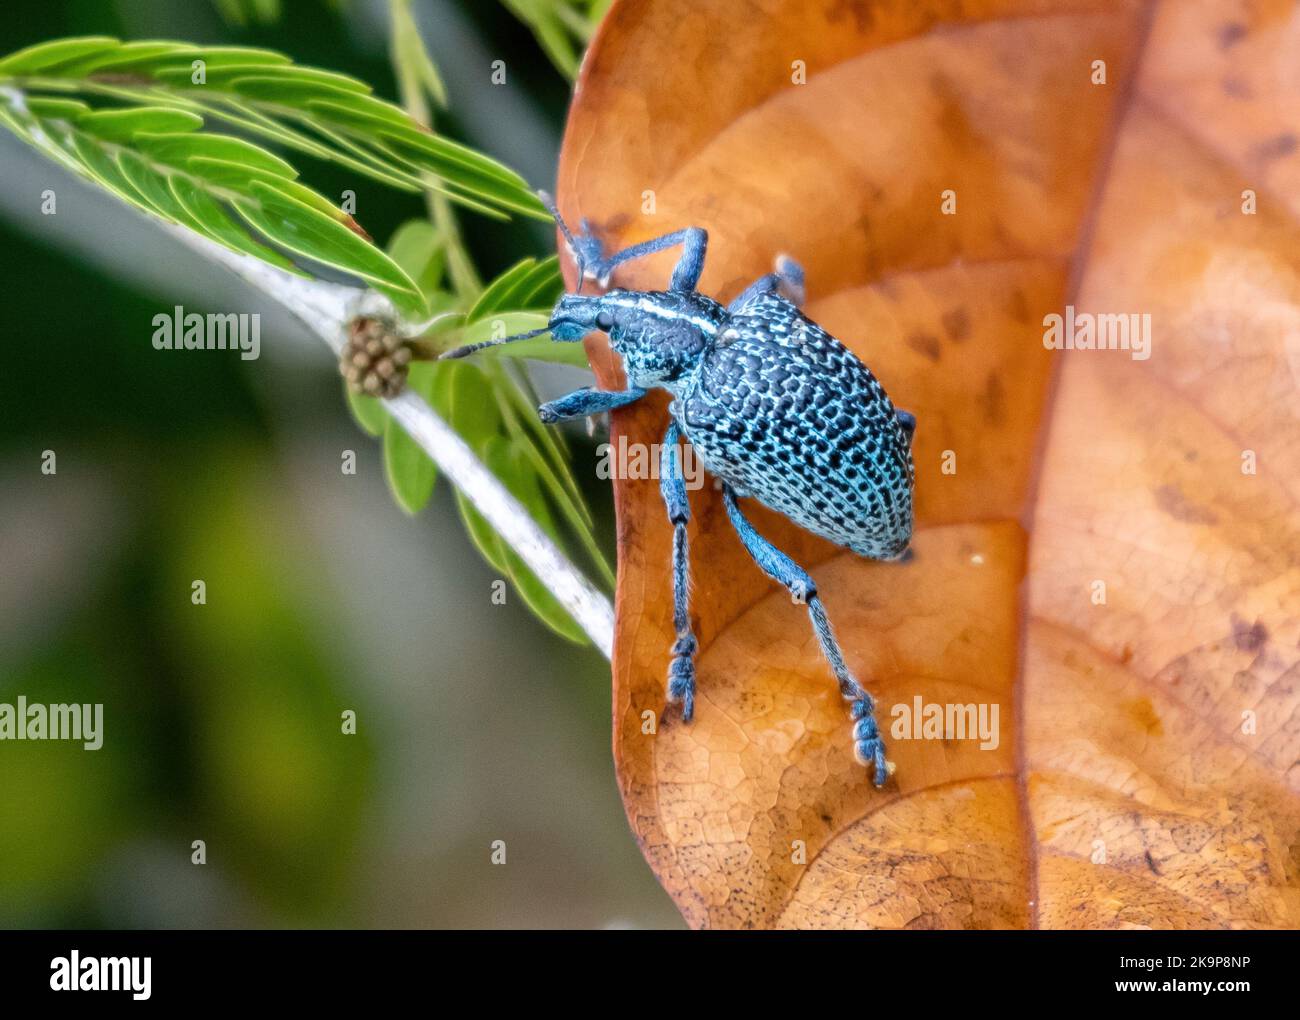 A Broad-nosed Weevil beetle (Entimus granulatus) on a brown leaf. Amazonas, Brazil Stock Photo